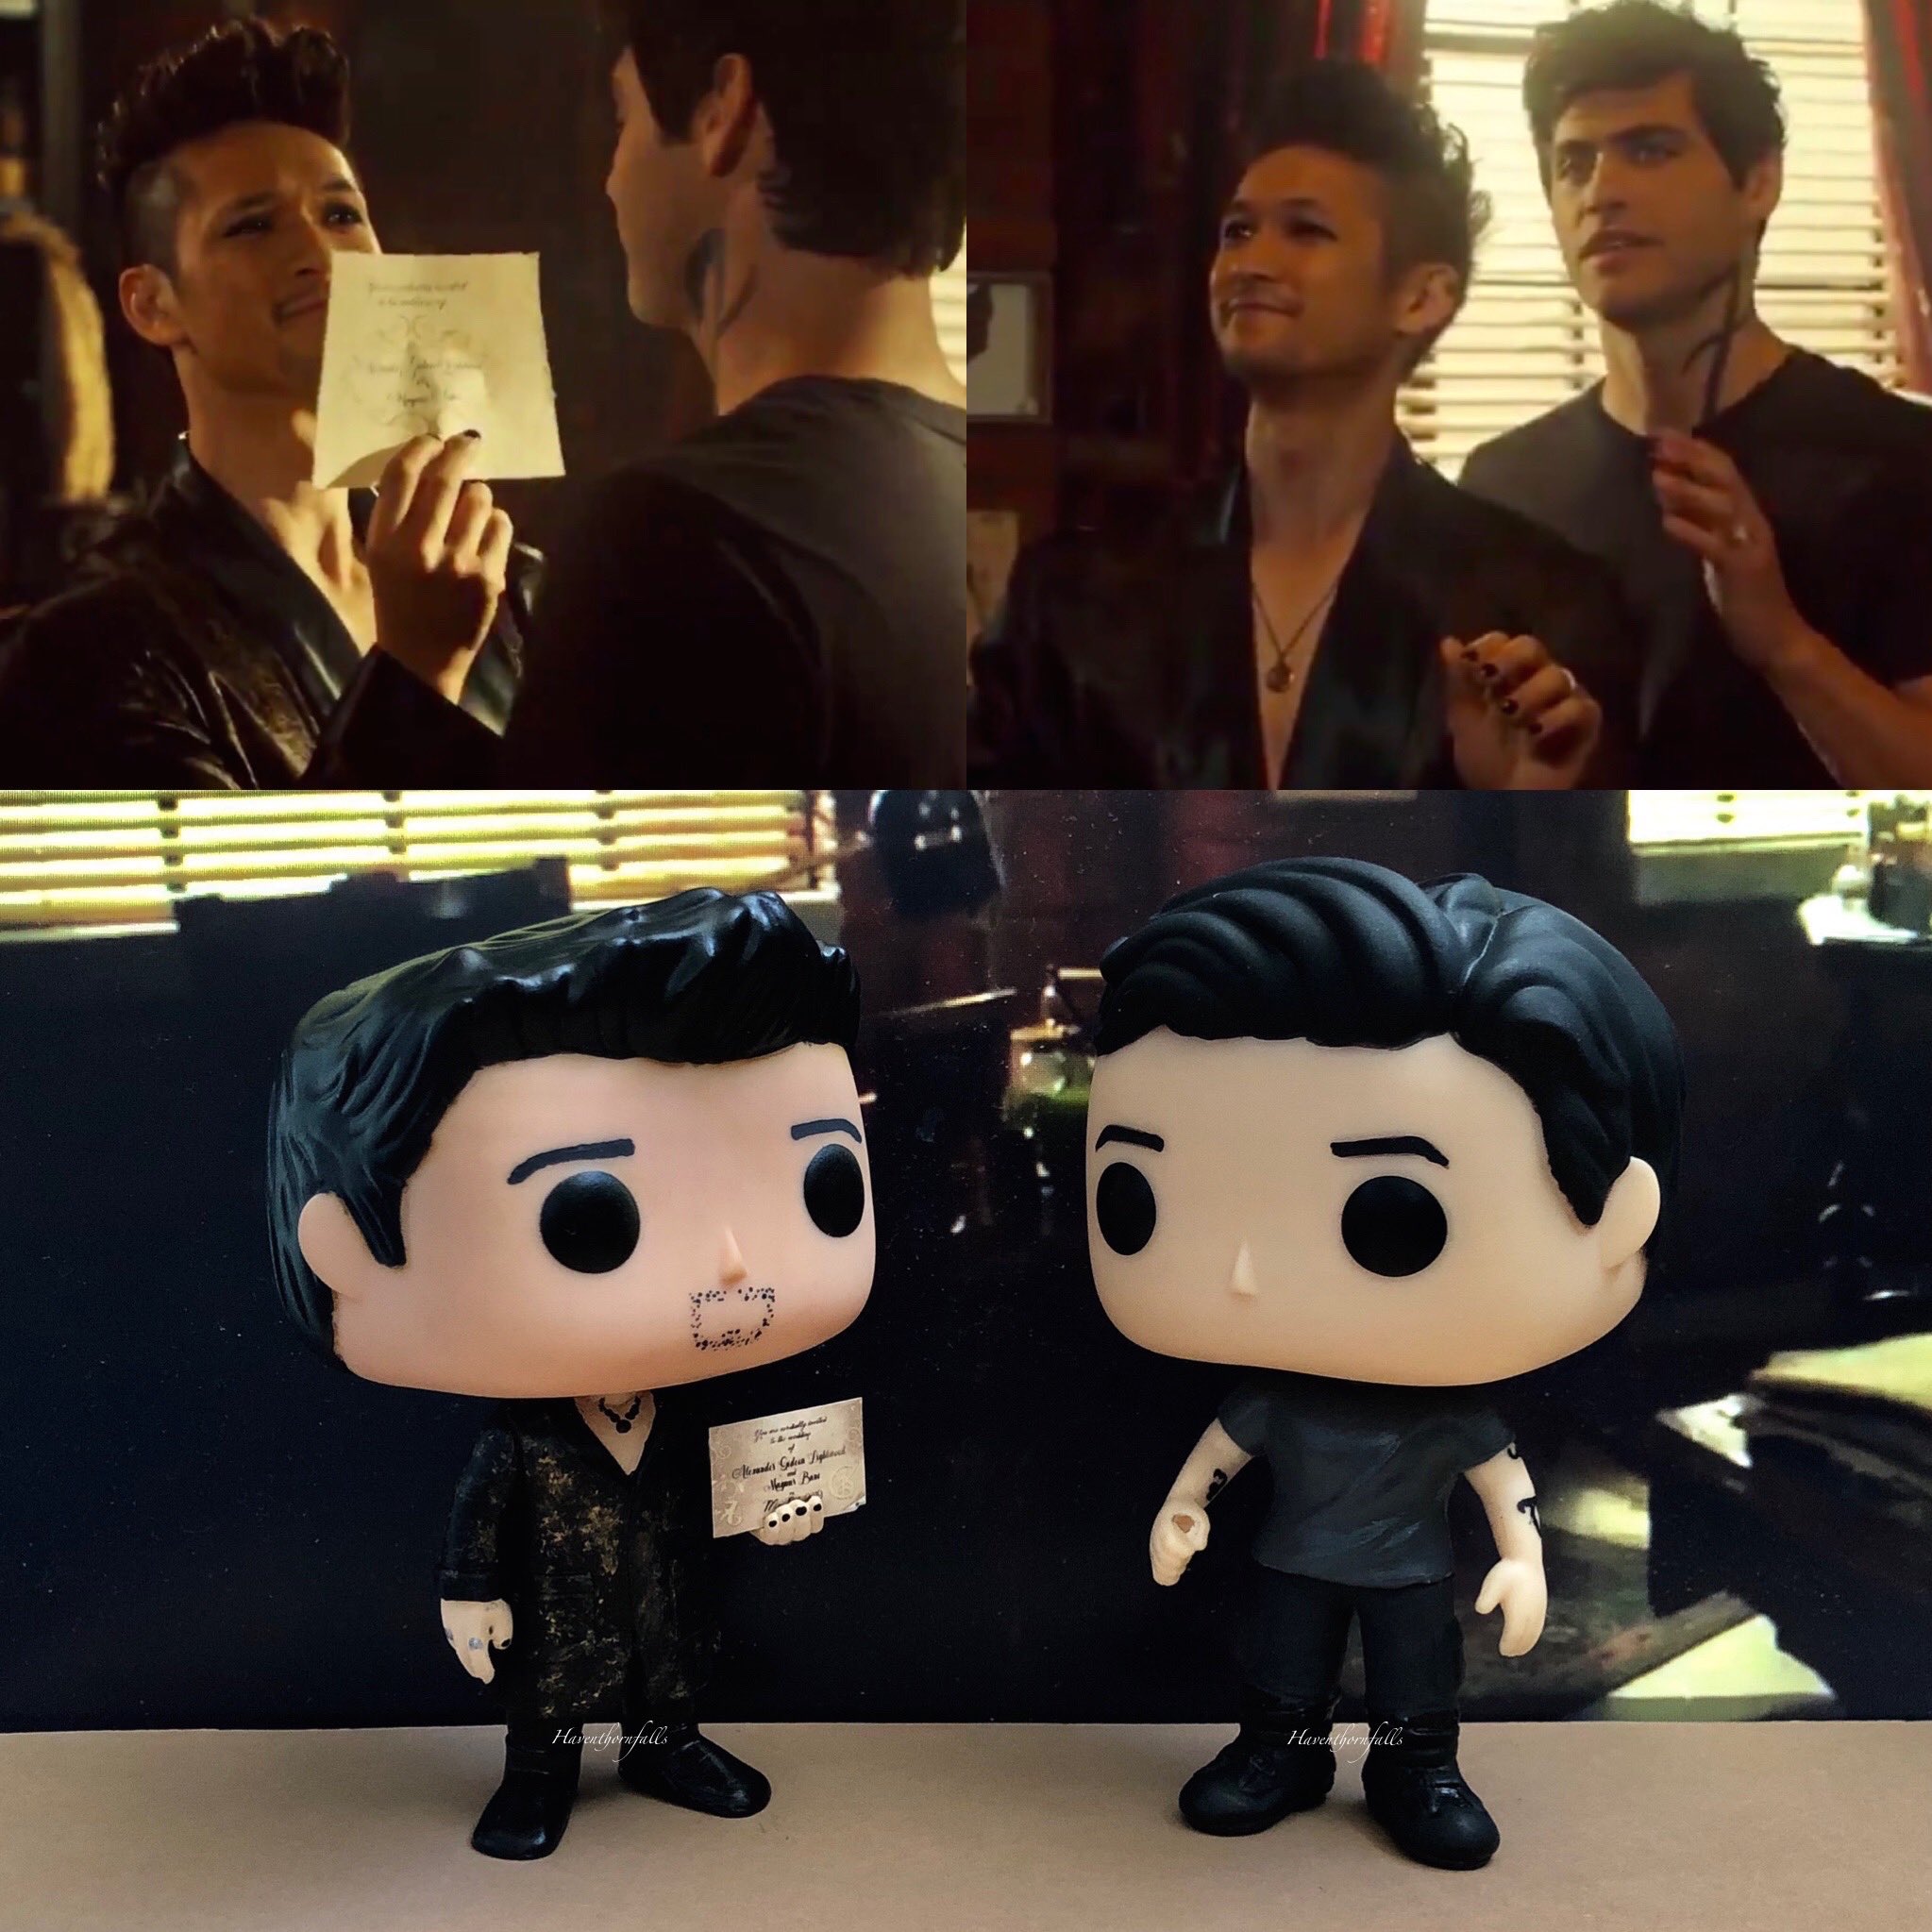 genopfyldning feudale pasta HavenThornFalls on Twitter: "“You are cordially invited to the wedding of  Alexander Gideon Lightwood and Magnus Bane...tonight.” Why wait even a day  longer? - Enjoy the weekend all! . . #Shadowhunters #Malec